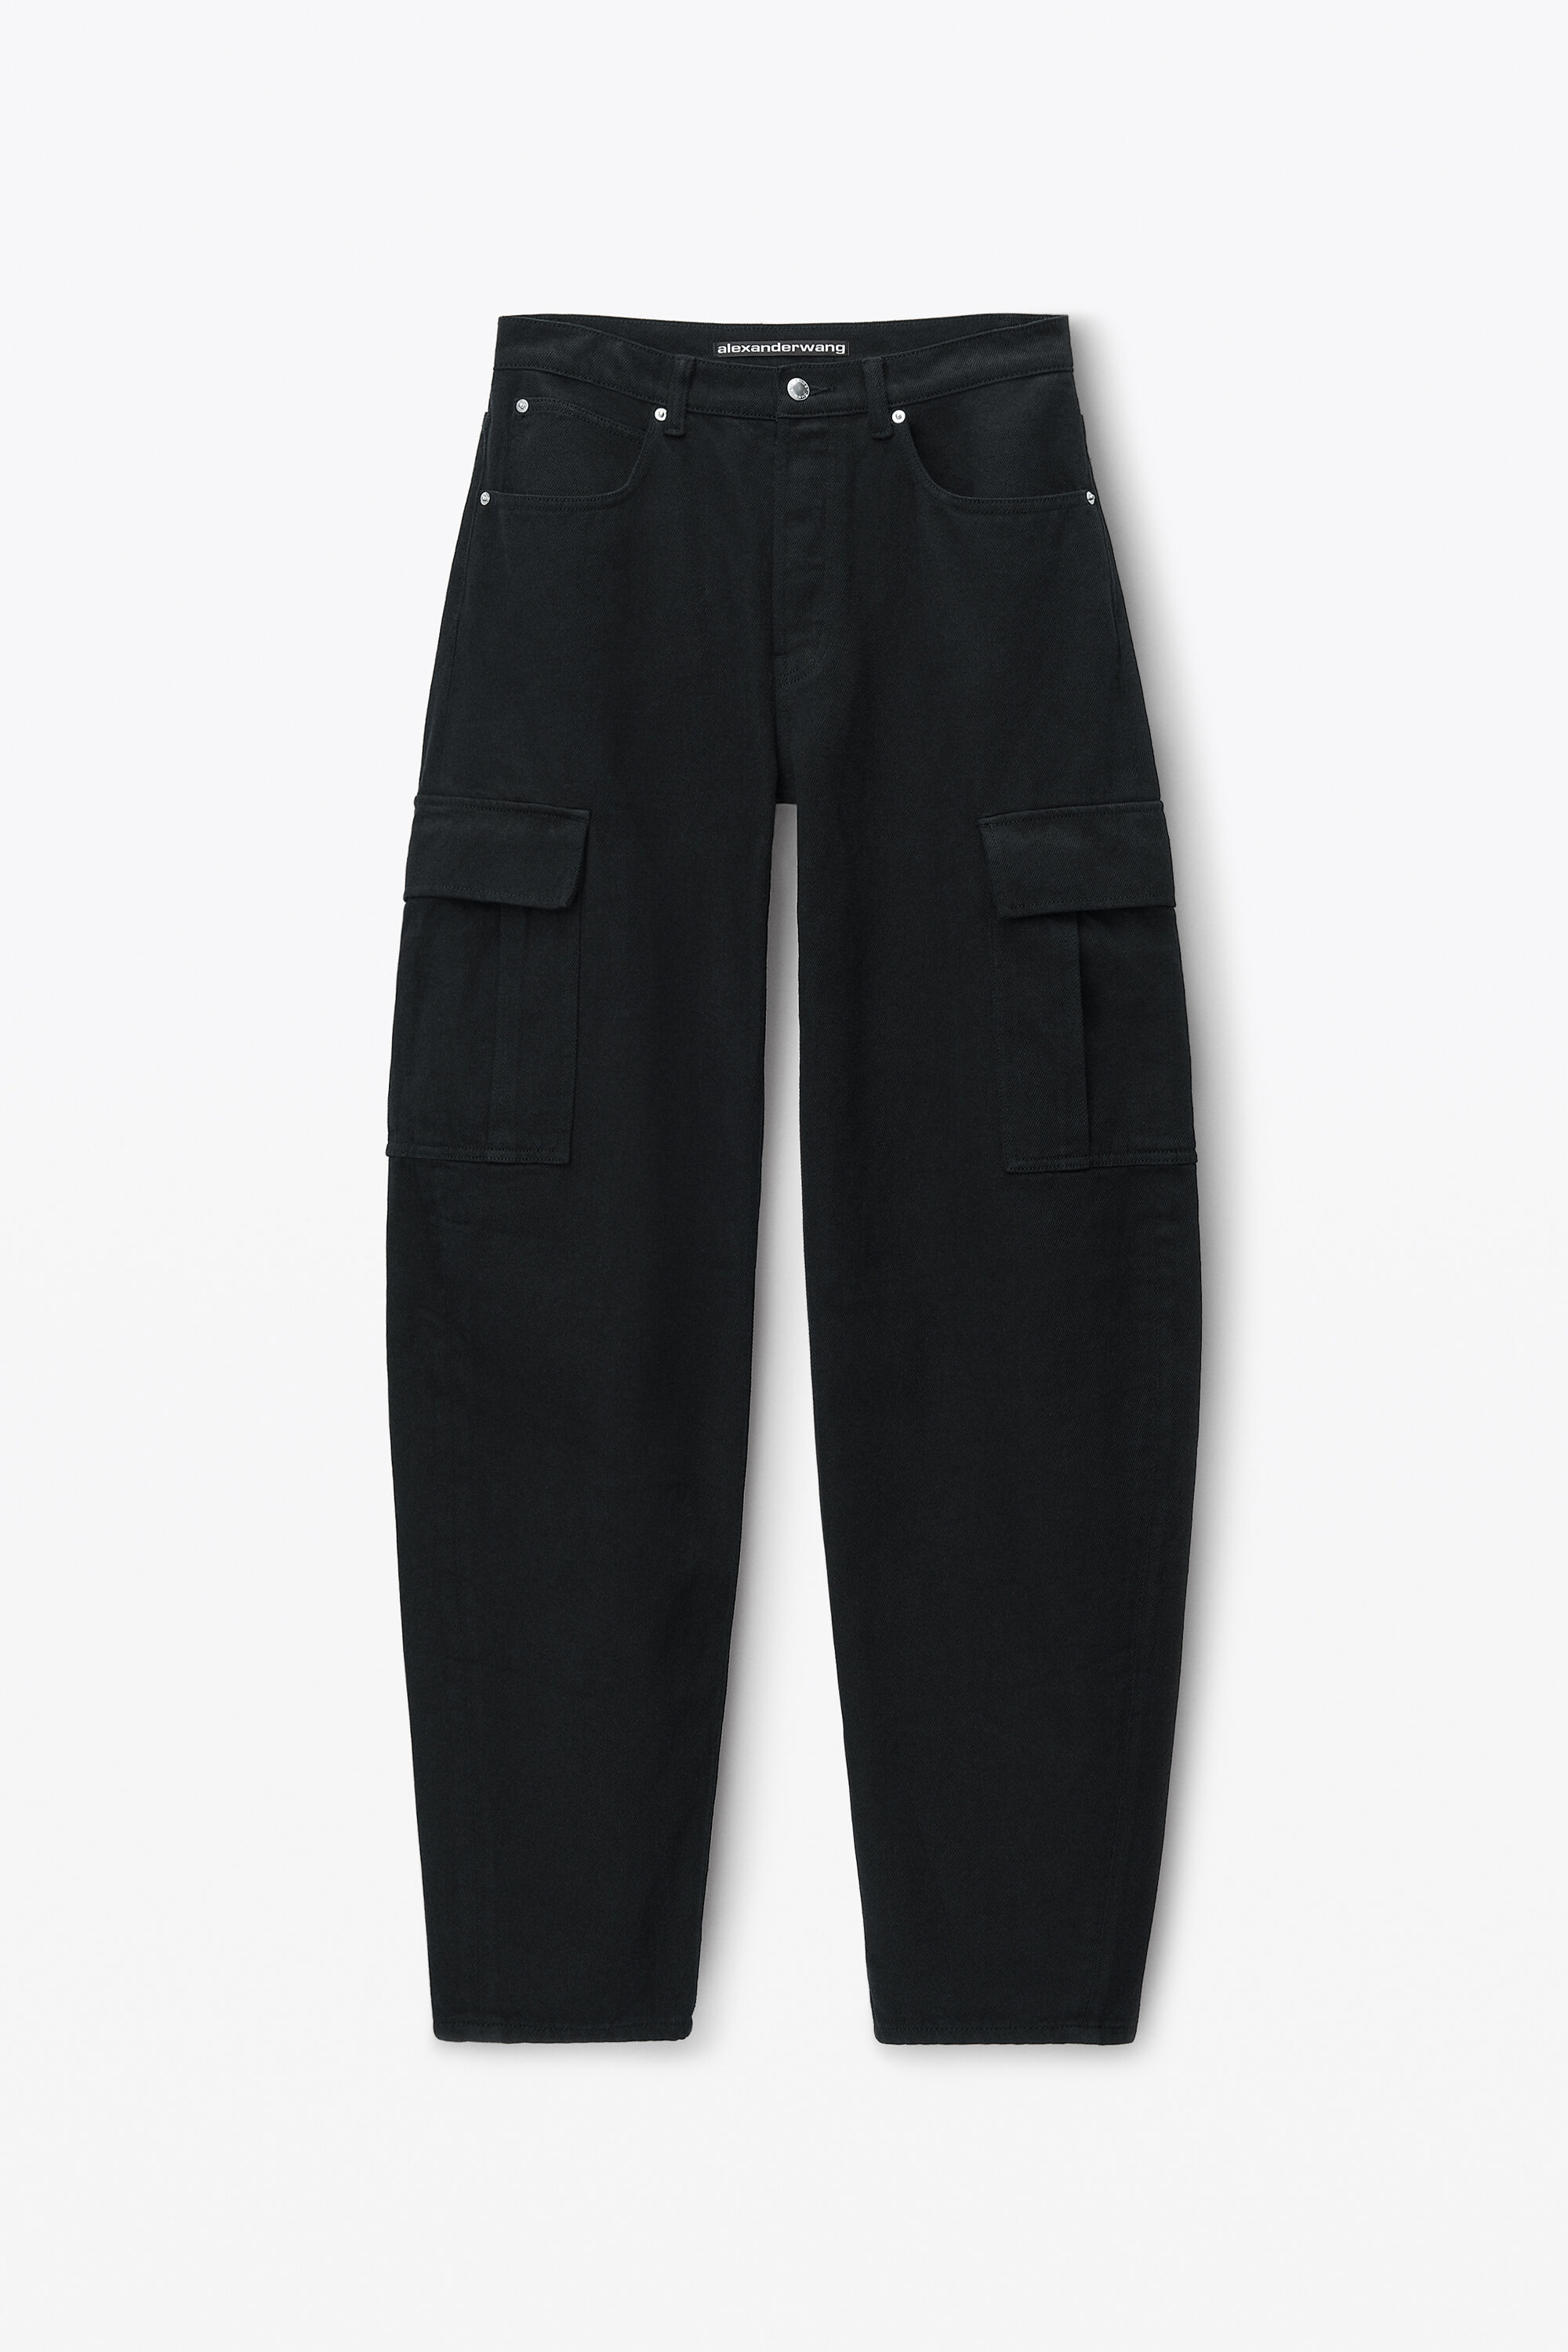 alexanderwang Oversize Cargo Jeans in Cotton WASHED BLACK 